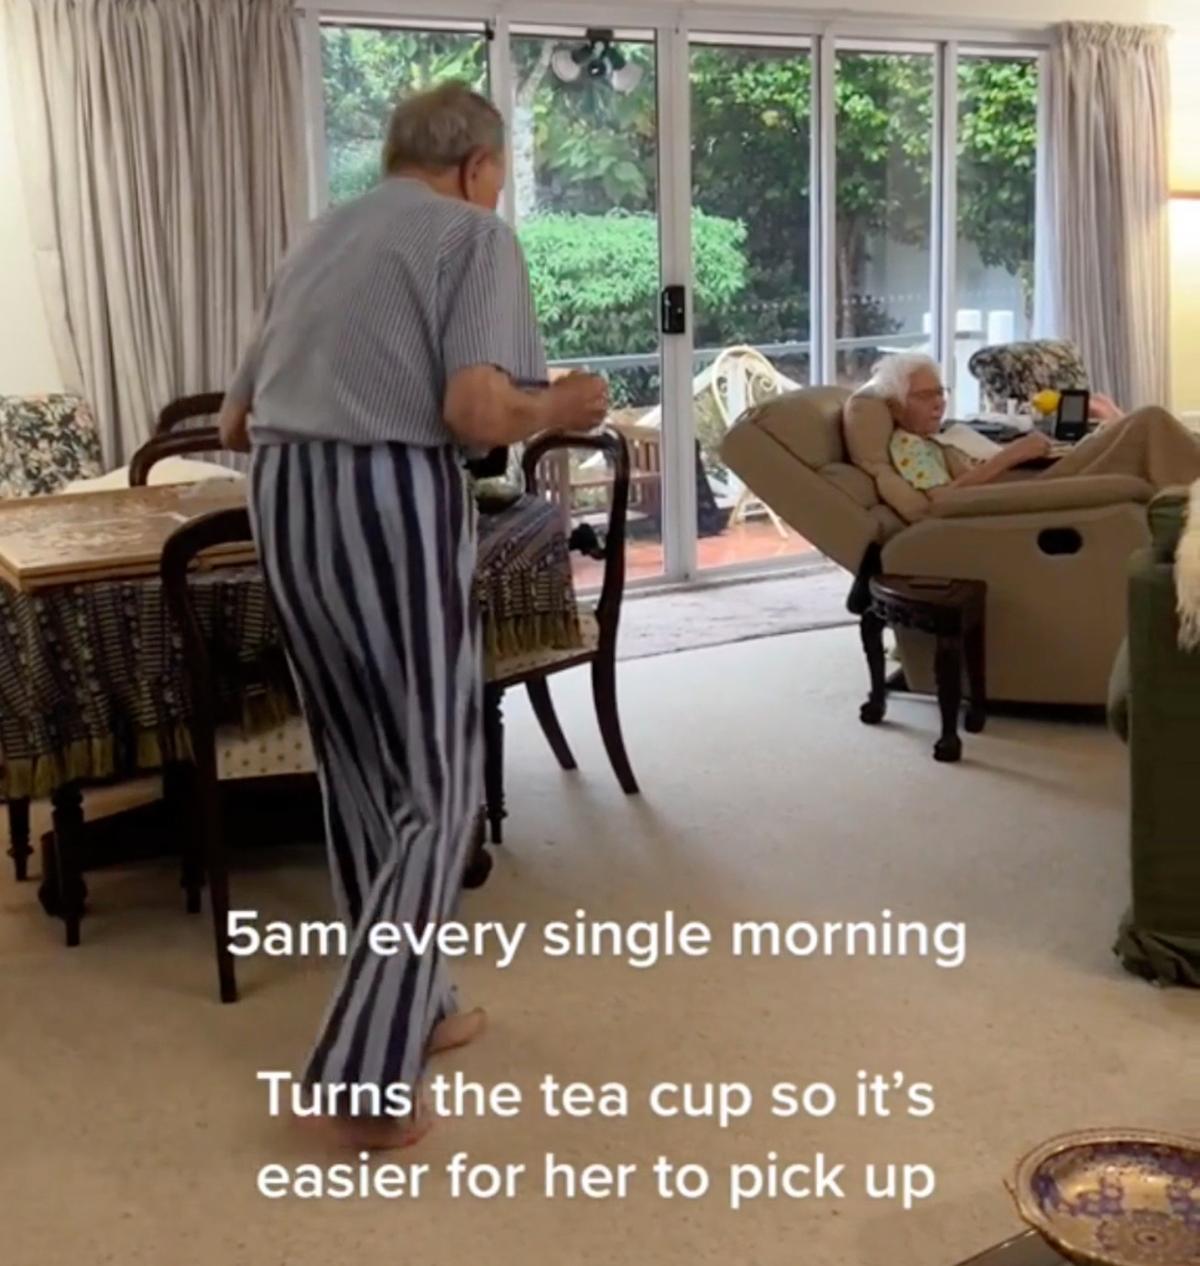 A screenshot of Mr. Hart bringing a cup of tea for Ms. Hart at 5 a.m. every single morning. (Courtesy of Tina Fulton-Kennedy)